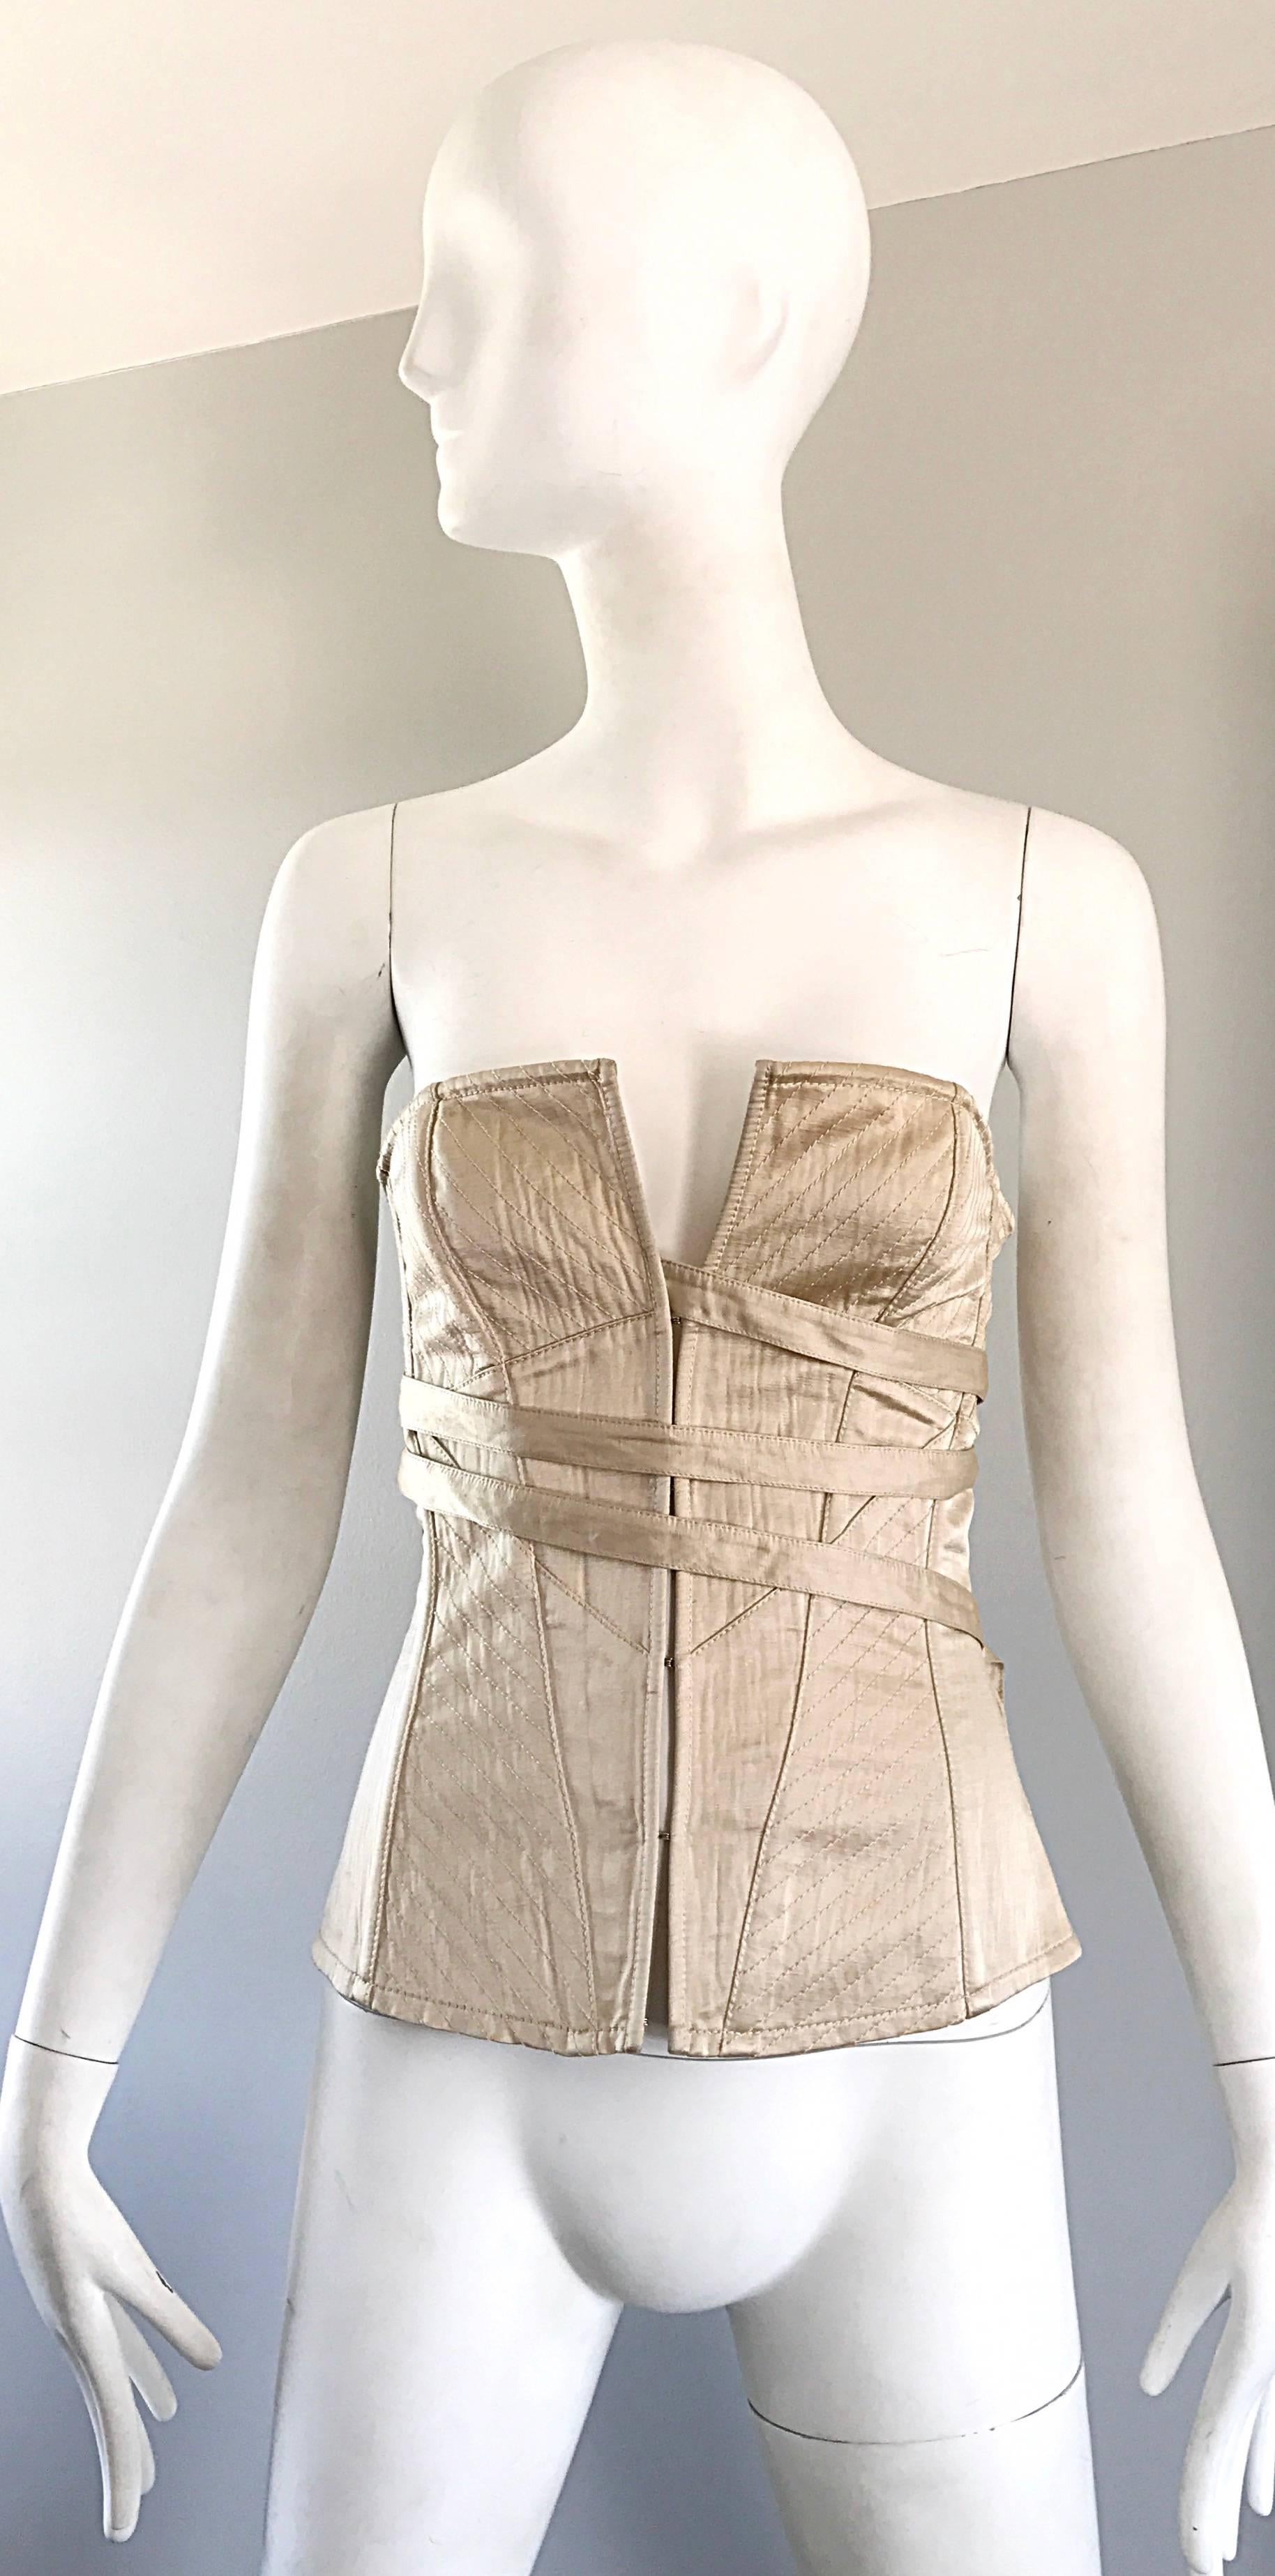 Brand new with tags late 1990s LA PERLA champagne / khaki silk bustier/corset top! Features an attached ribbon that laces through slots on each side. Interior boning keeps everything in place. Hook-and-eye closures up the front. Can easily be